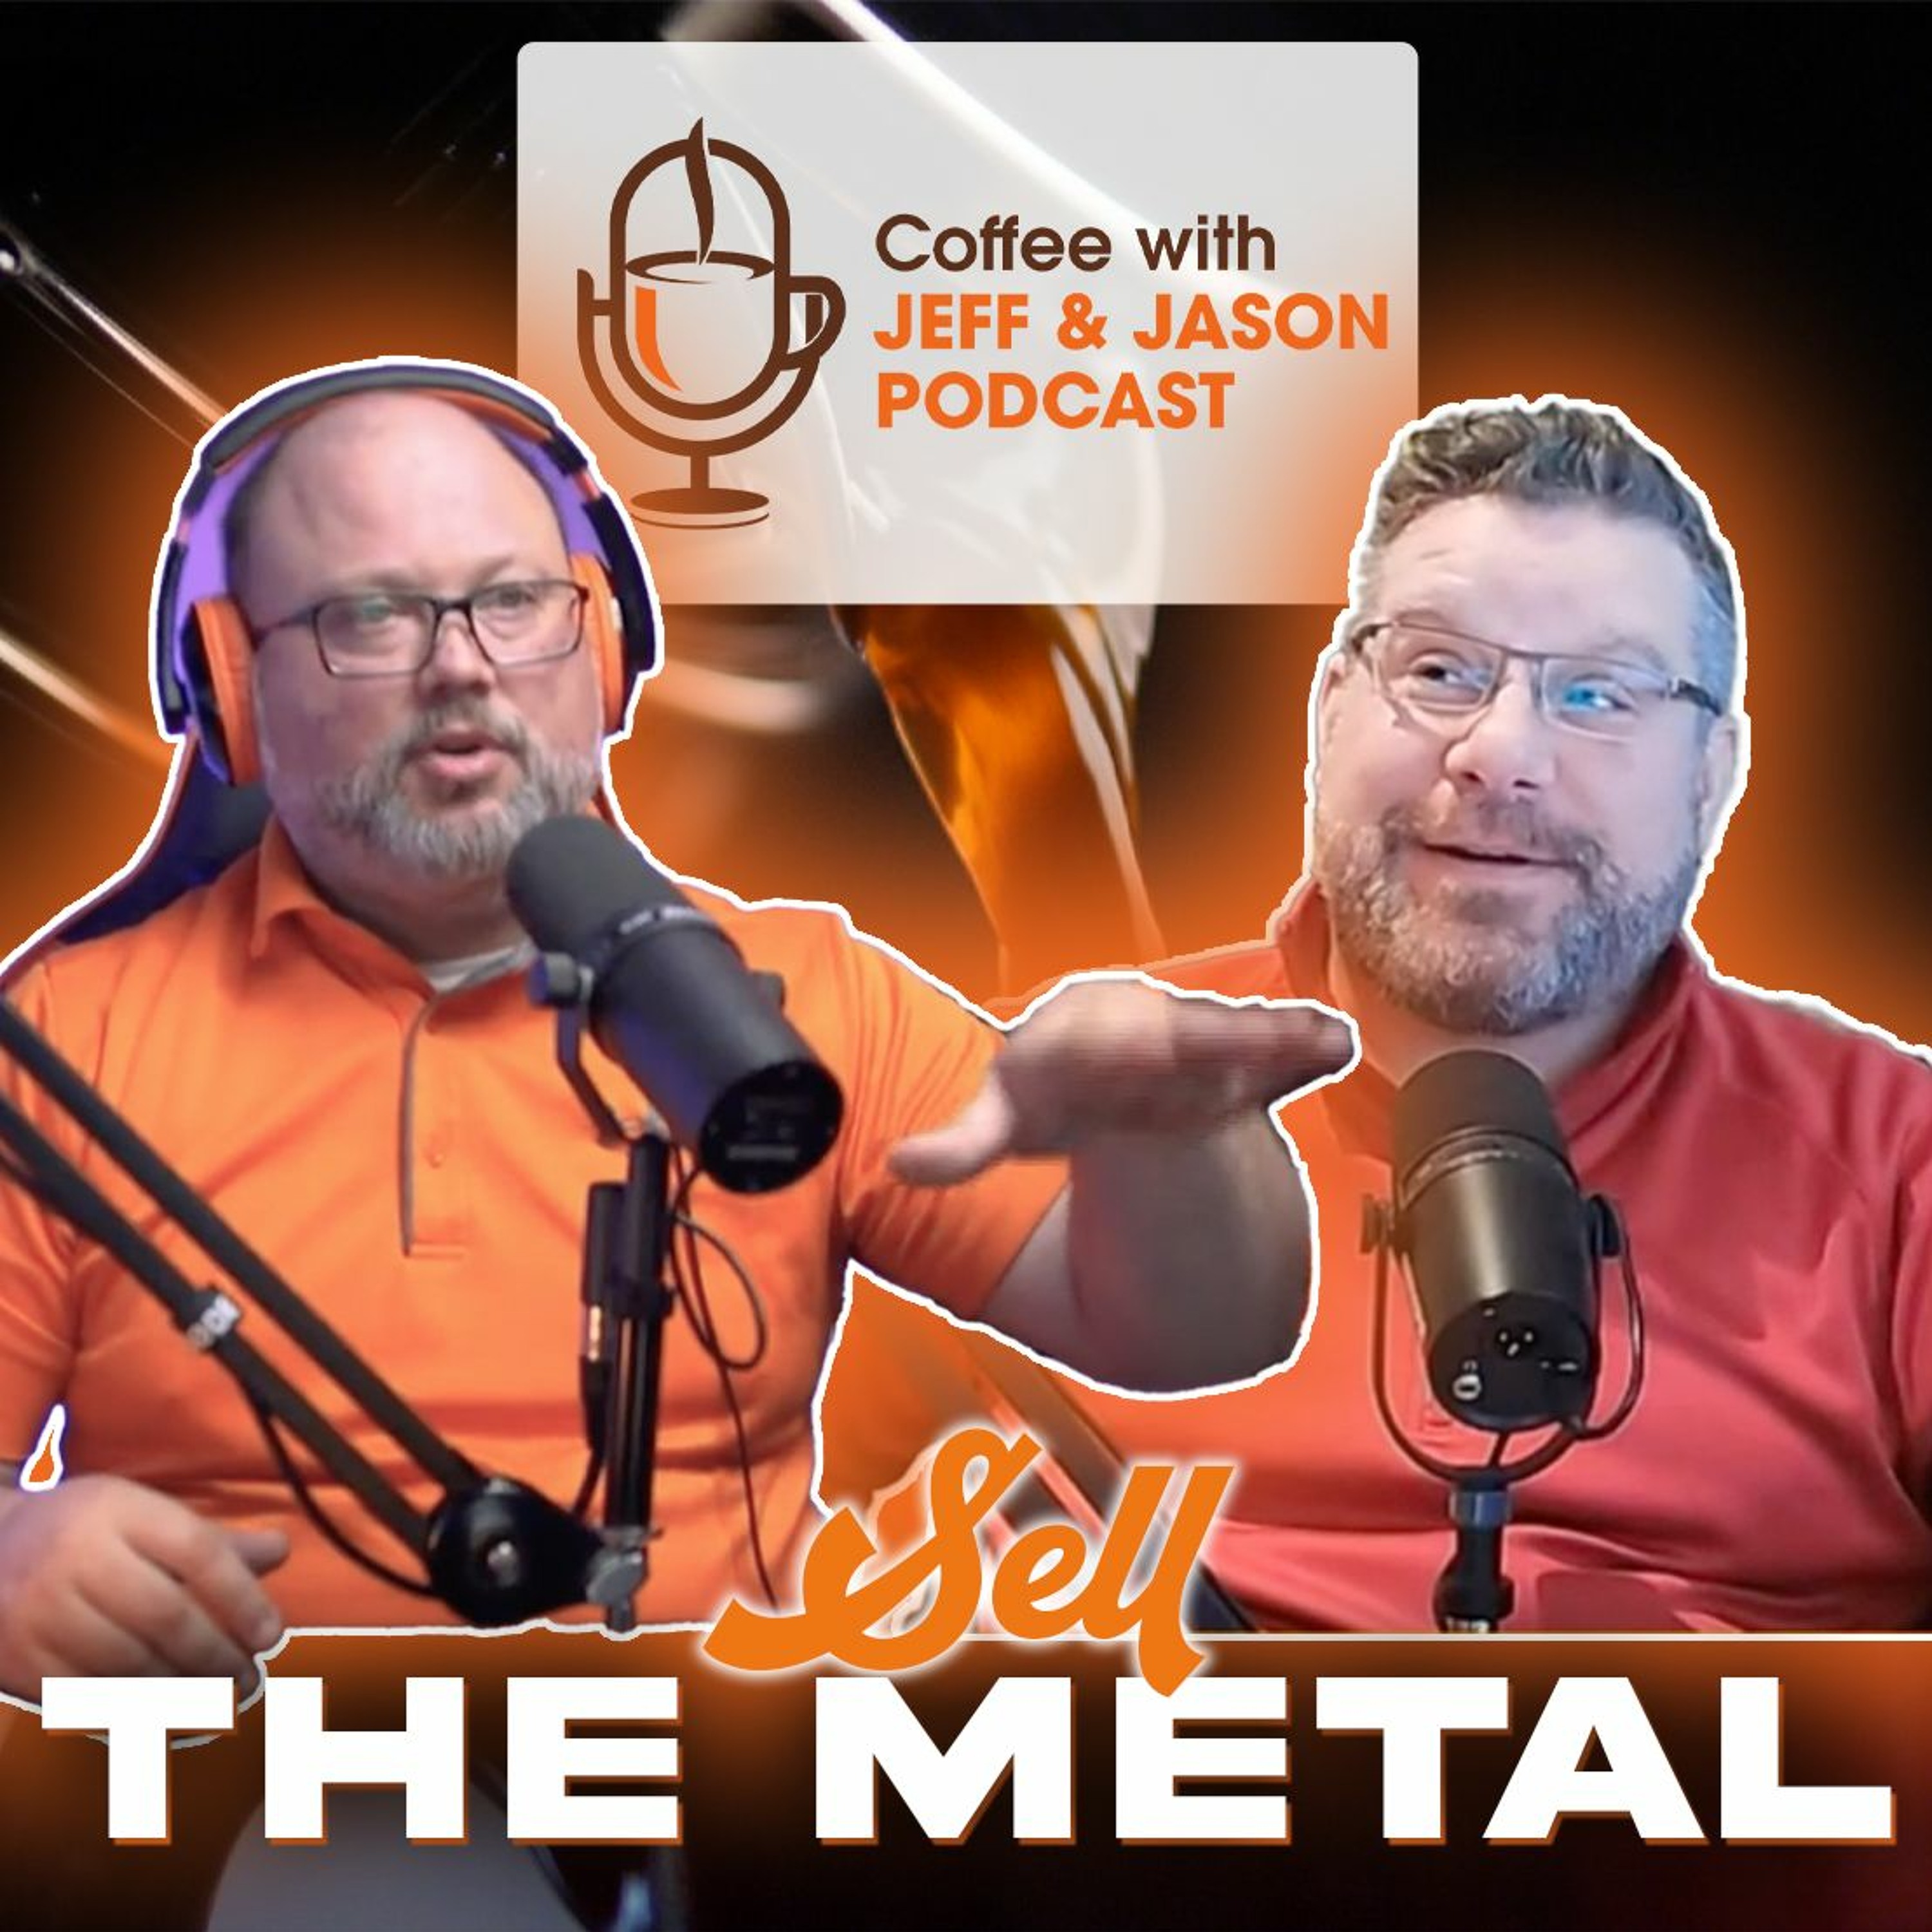 Sell The Metal – Coffee With Jeff & Jason Podcast